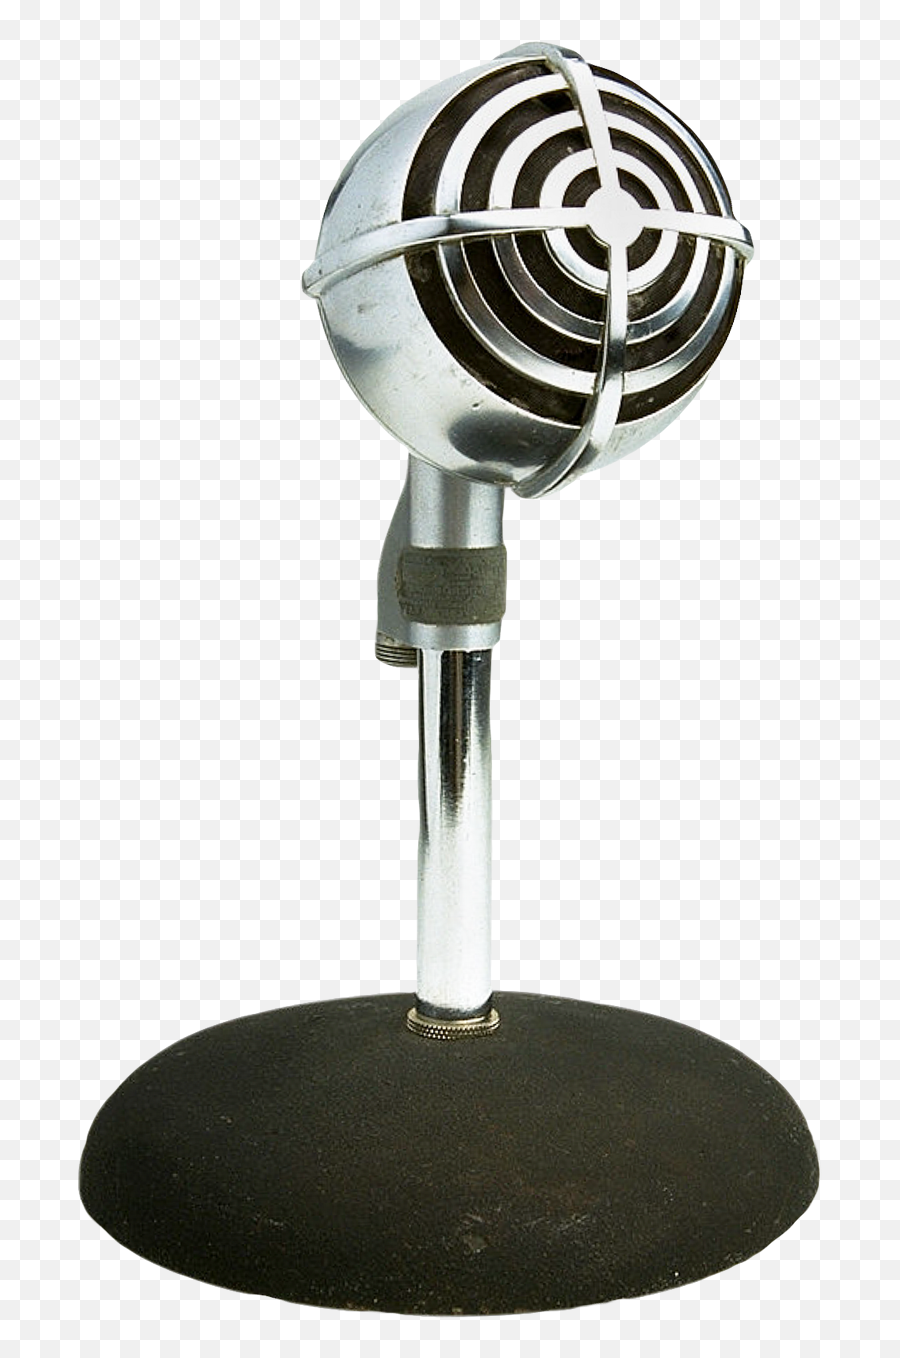 Retro Style Microphone Png Image - Pngpix Microphone,Microphone Png